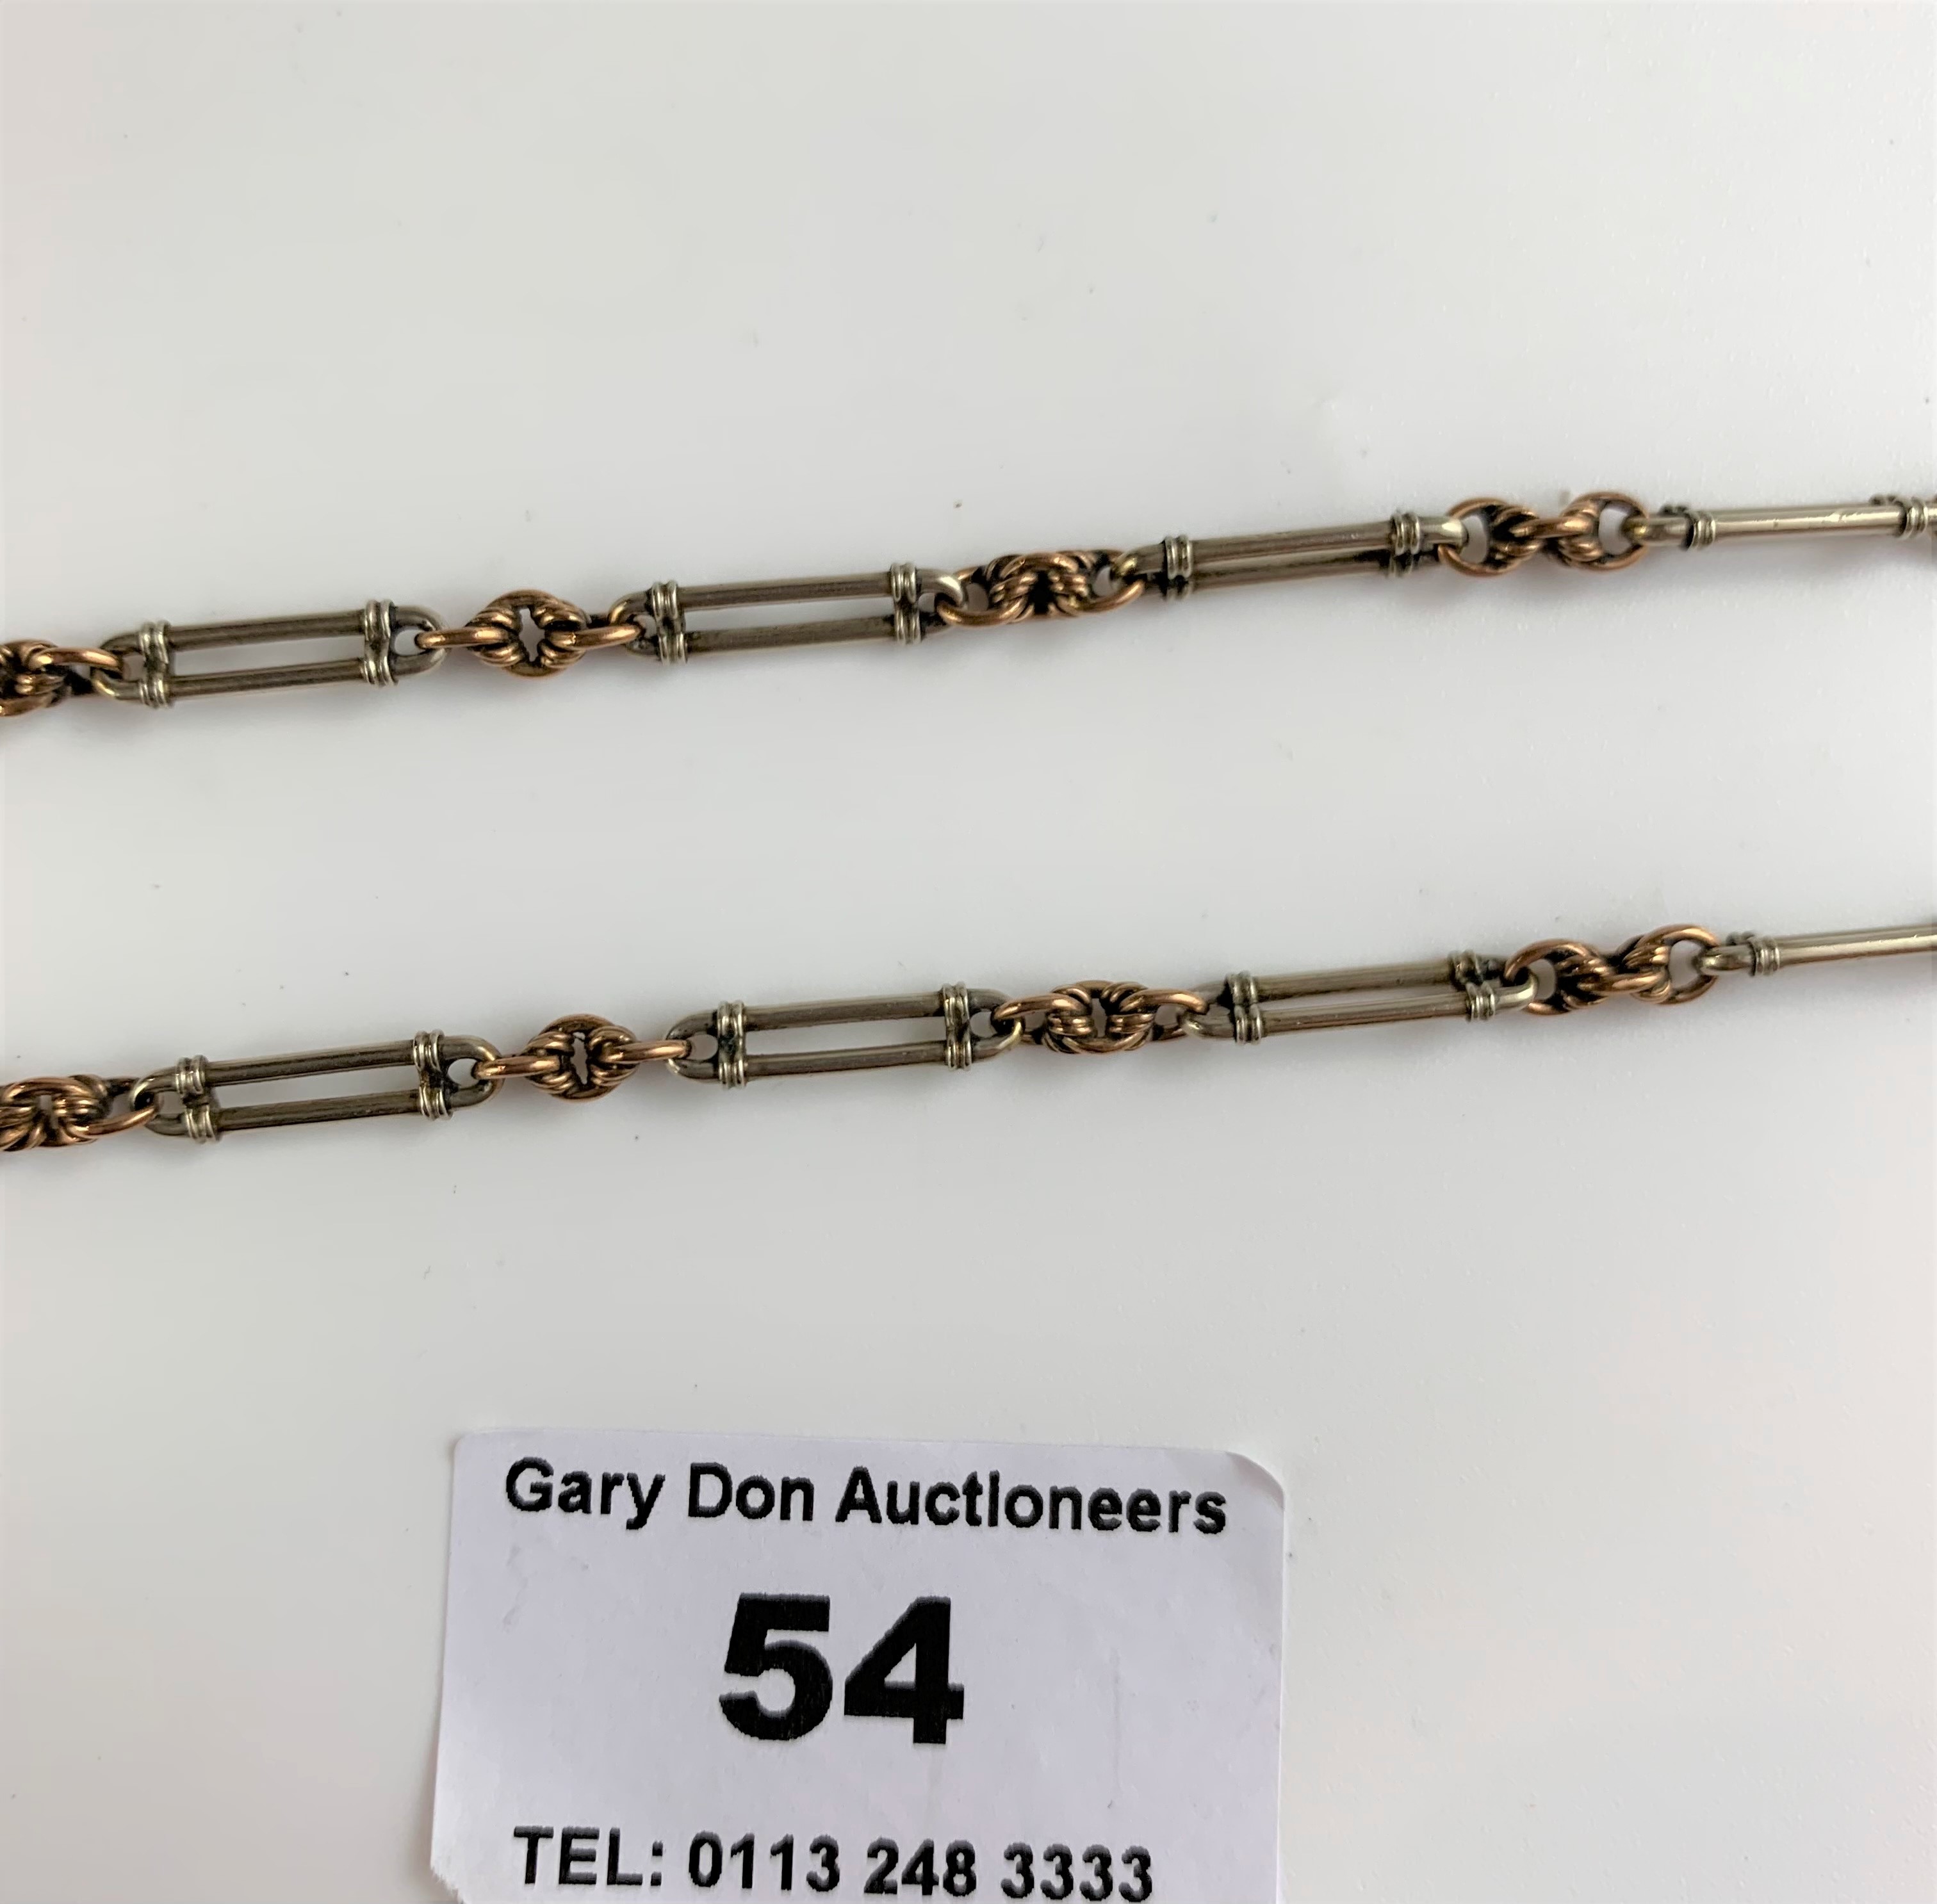 9k gold watch chain, length 14.5”, w: 10.8 gms - Image 2 of 4